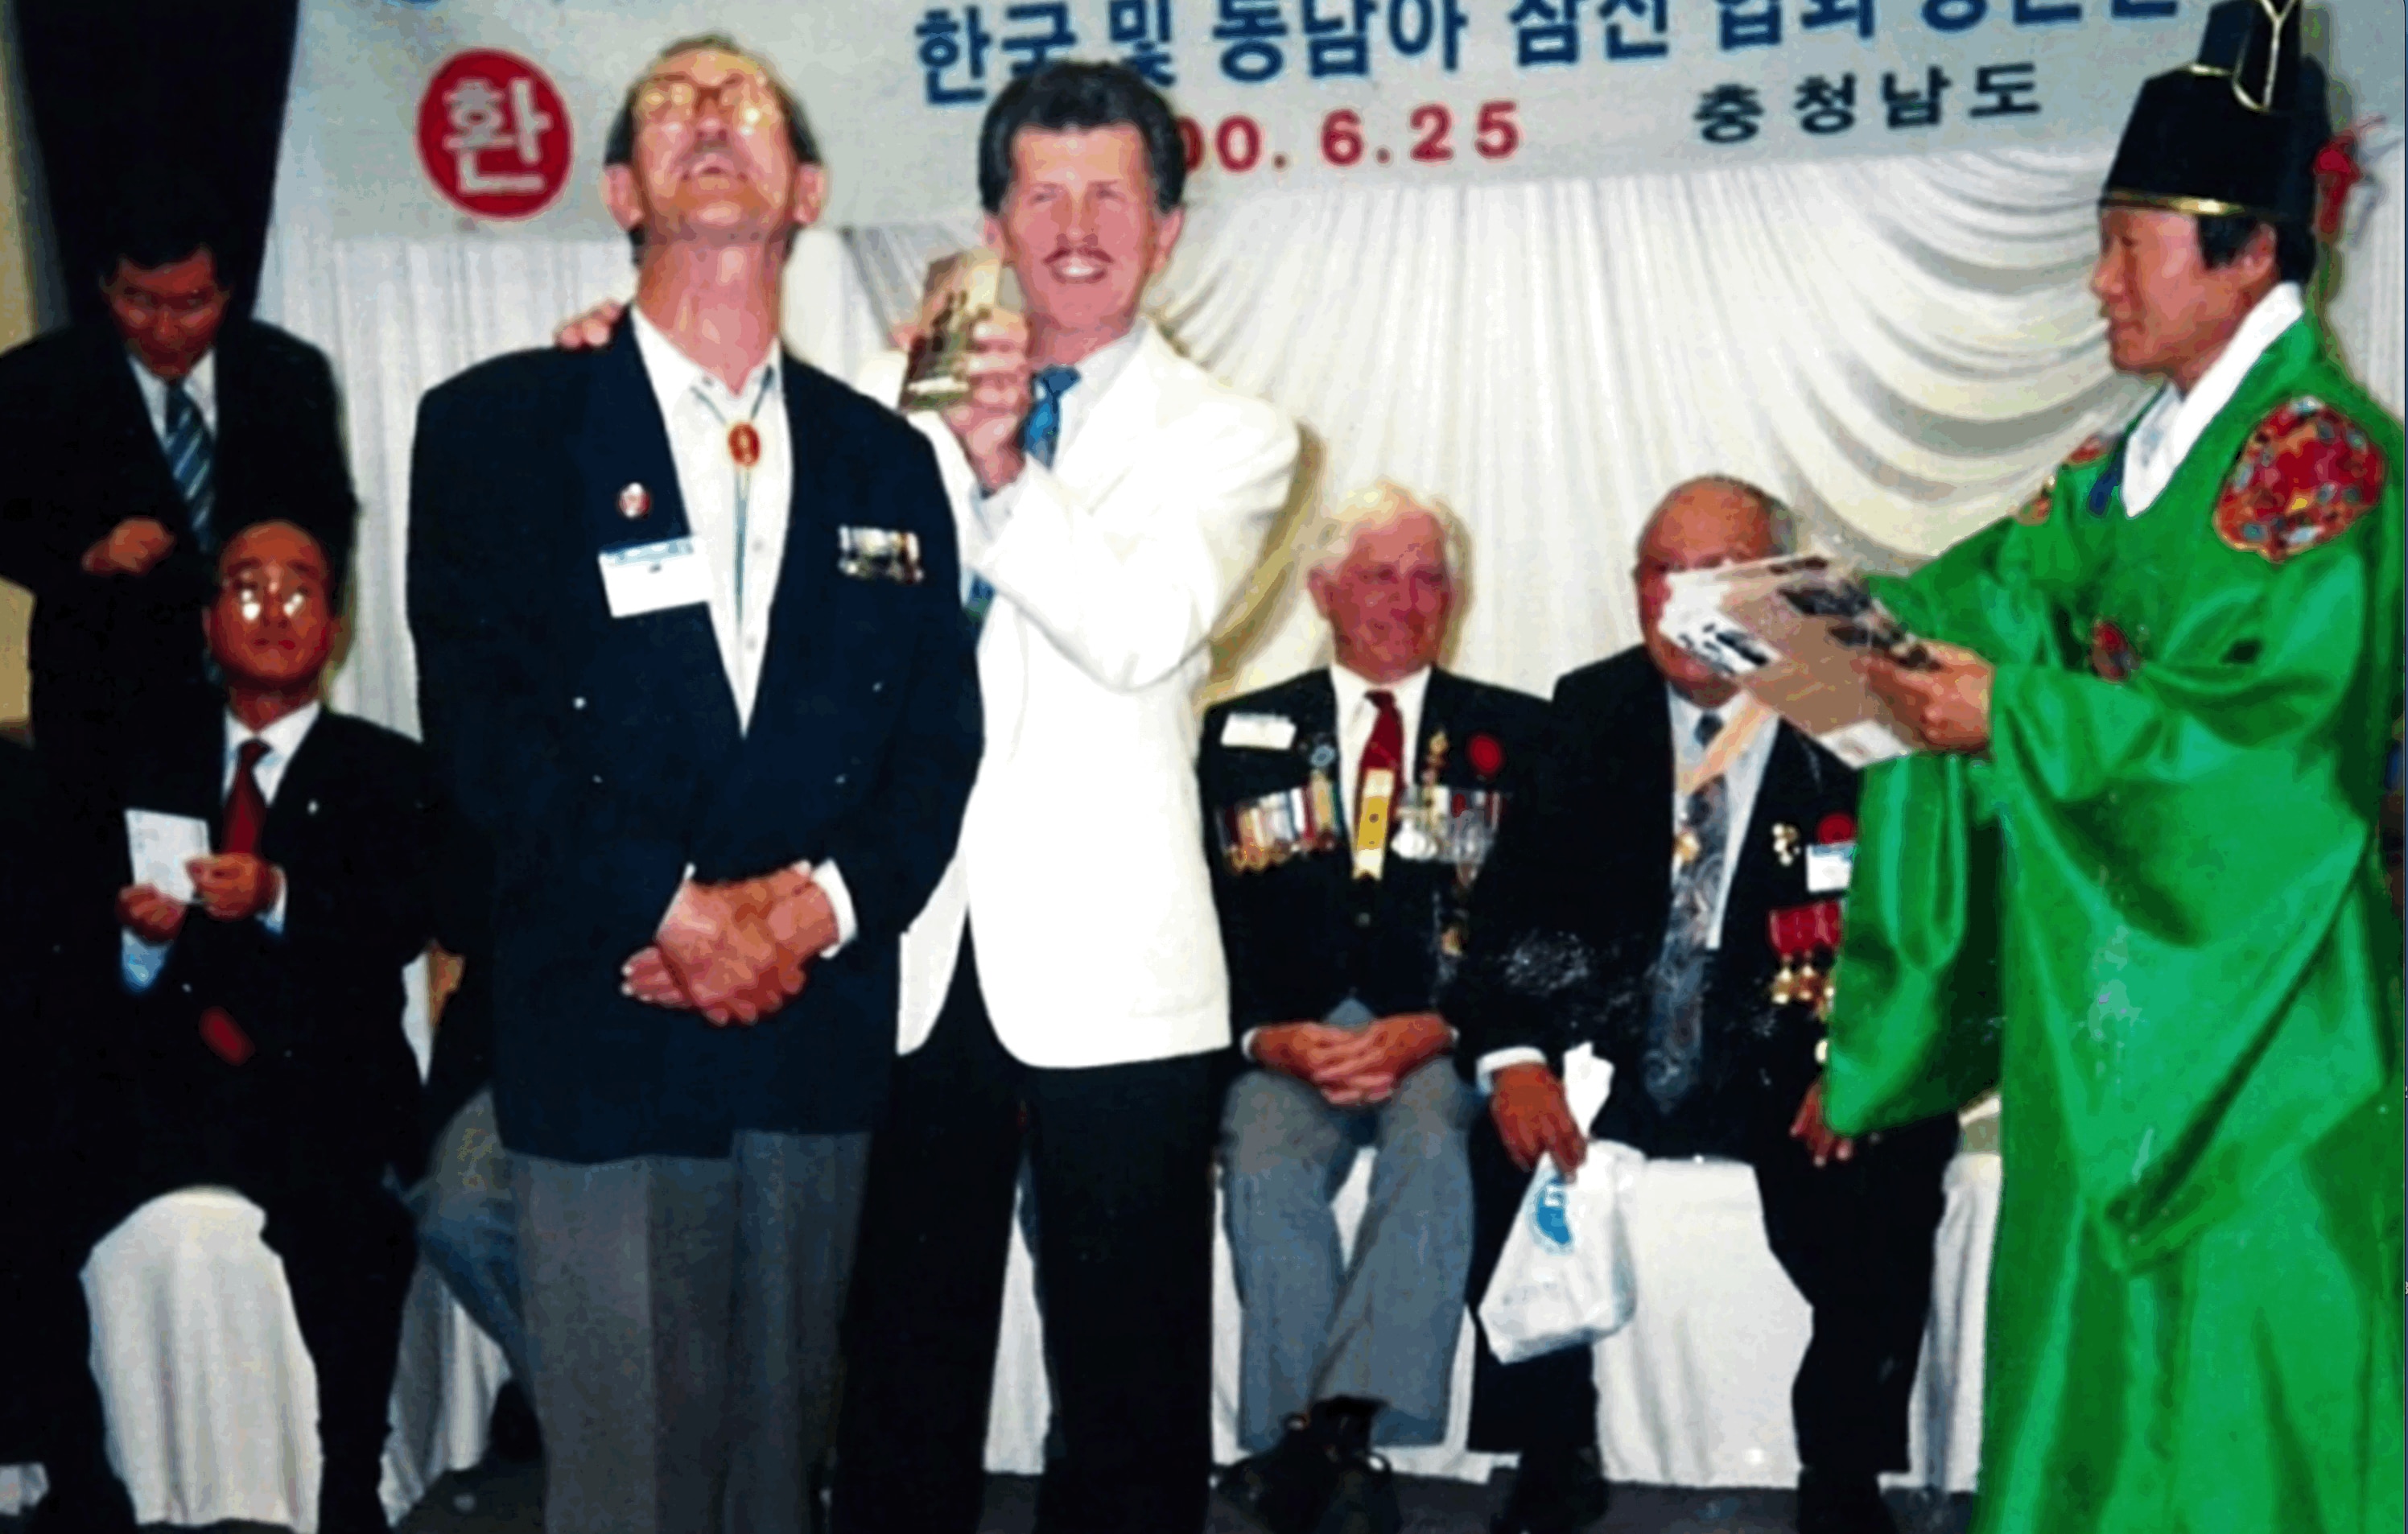 Korean War veterans Mr. Ron Cashman and Mr. Johny Bineham pictured during a guest trip to Korea in 2000.  